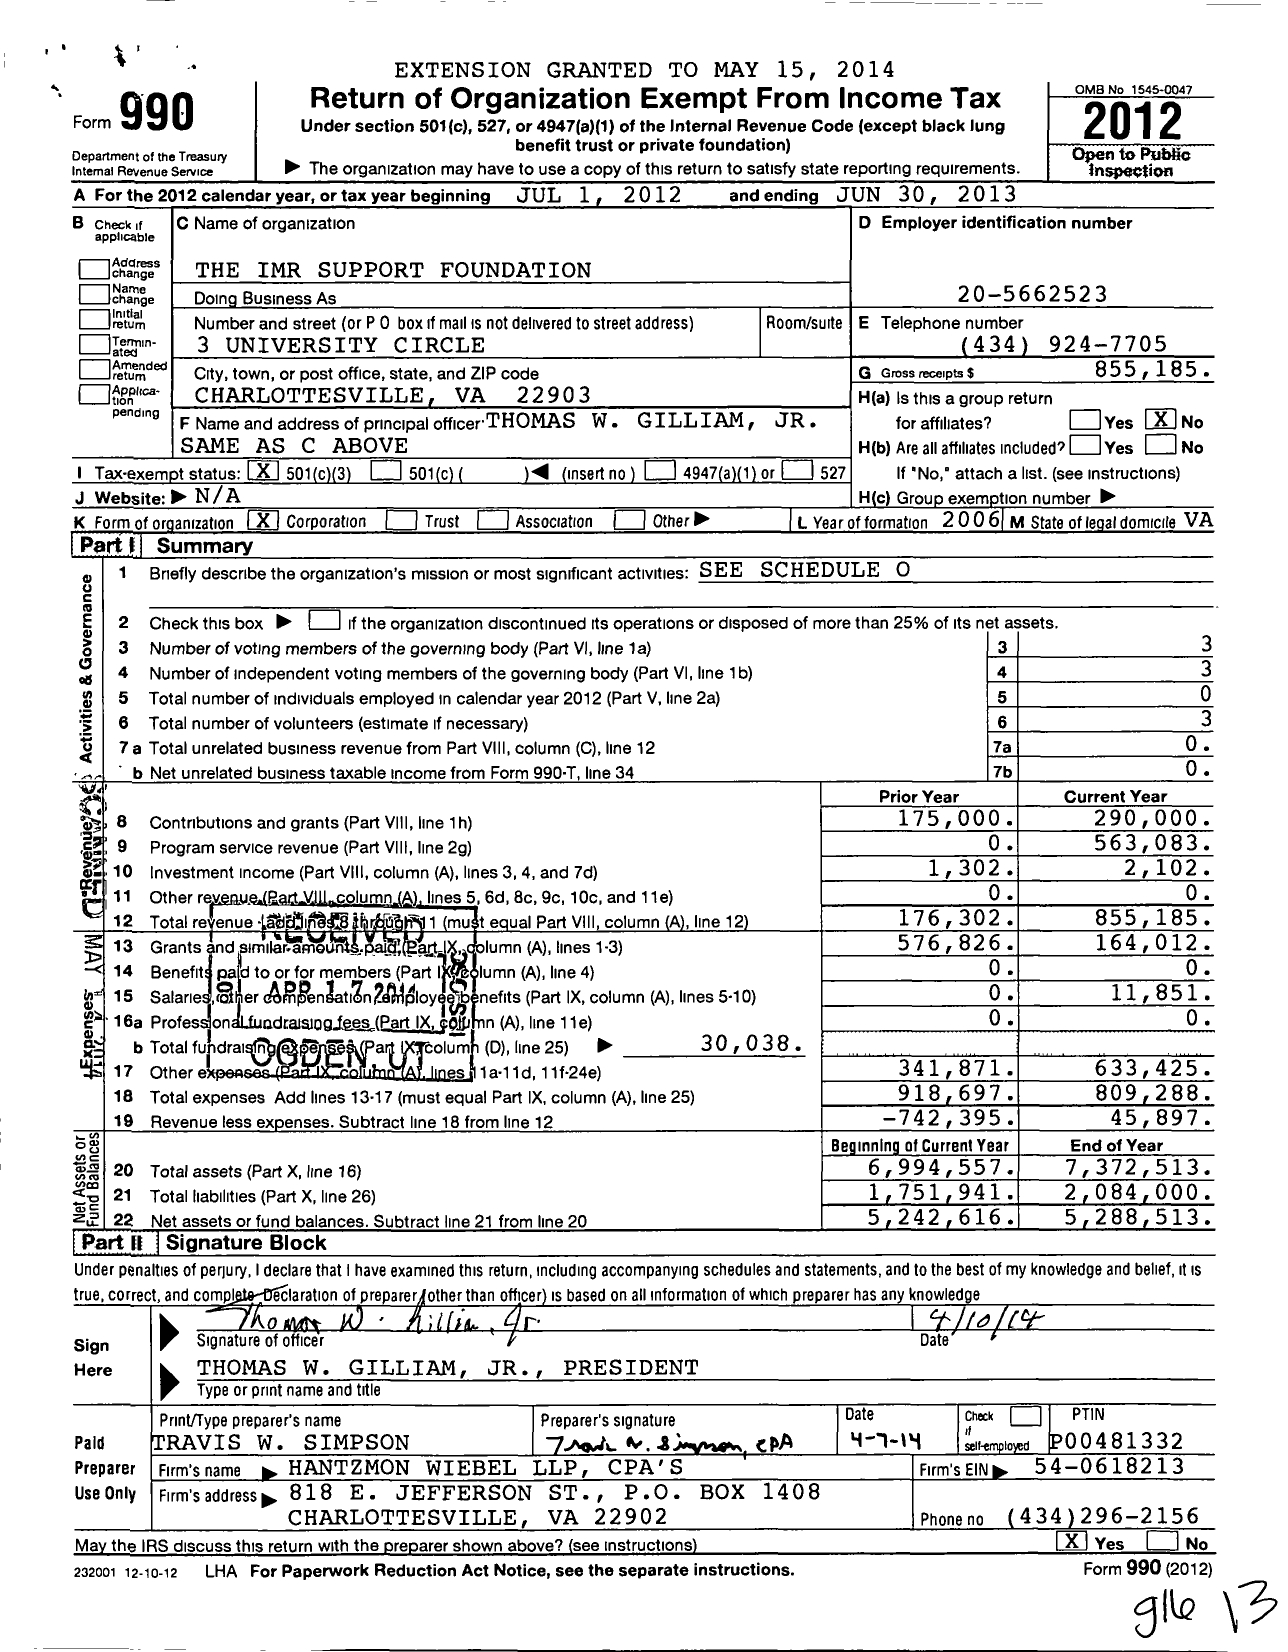 Image of first page of 2012 Form 990 for The Imr Support Foundation